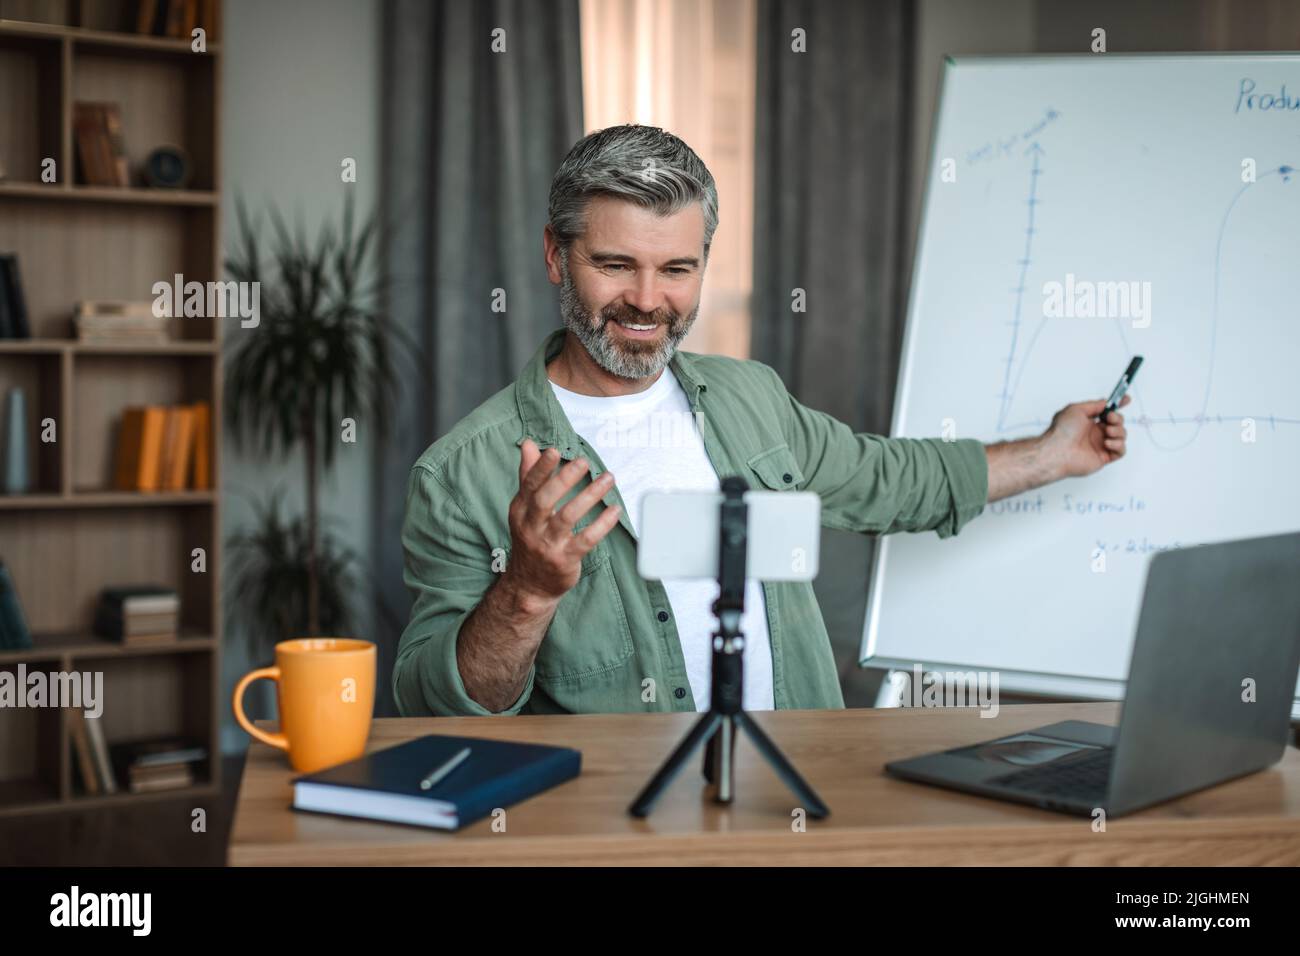 Smiling caucasian old man teacher with beard looks at smartphone and points at blackboard Stock Photo